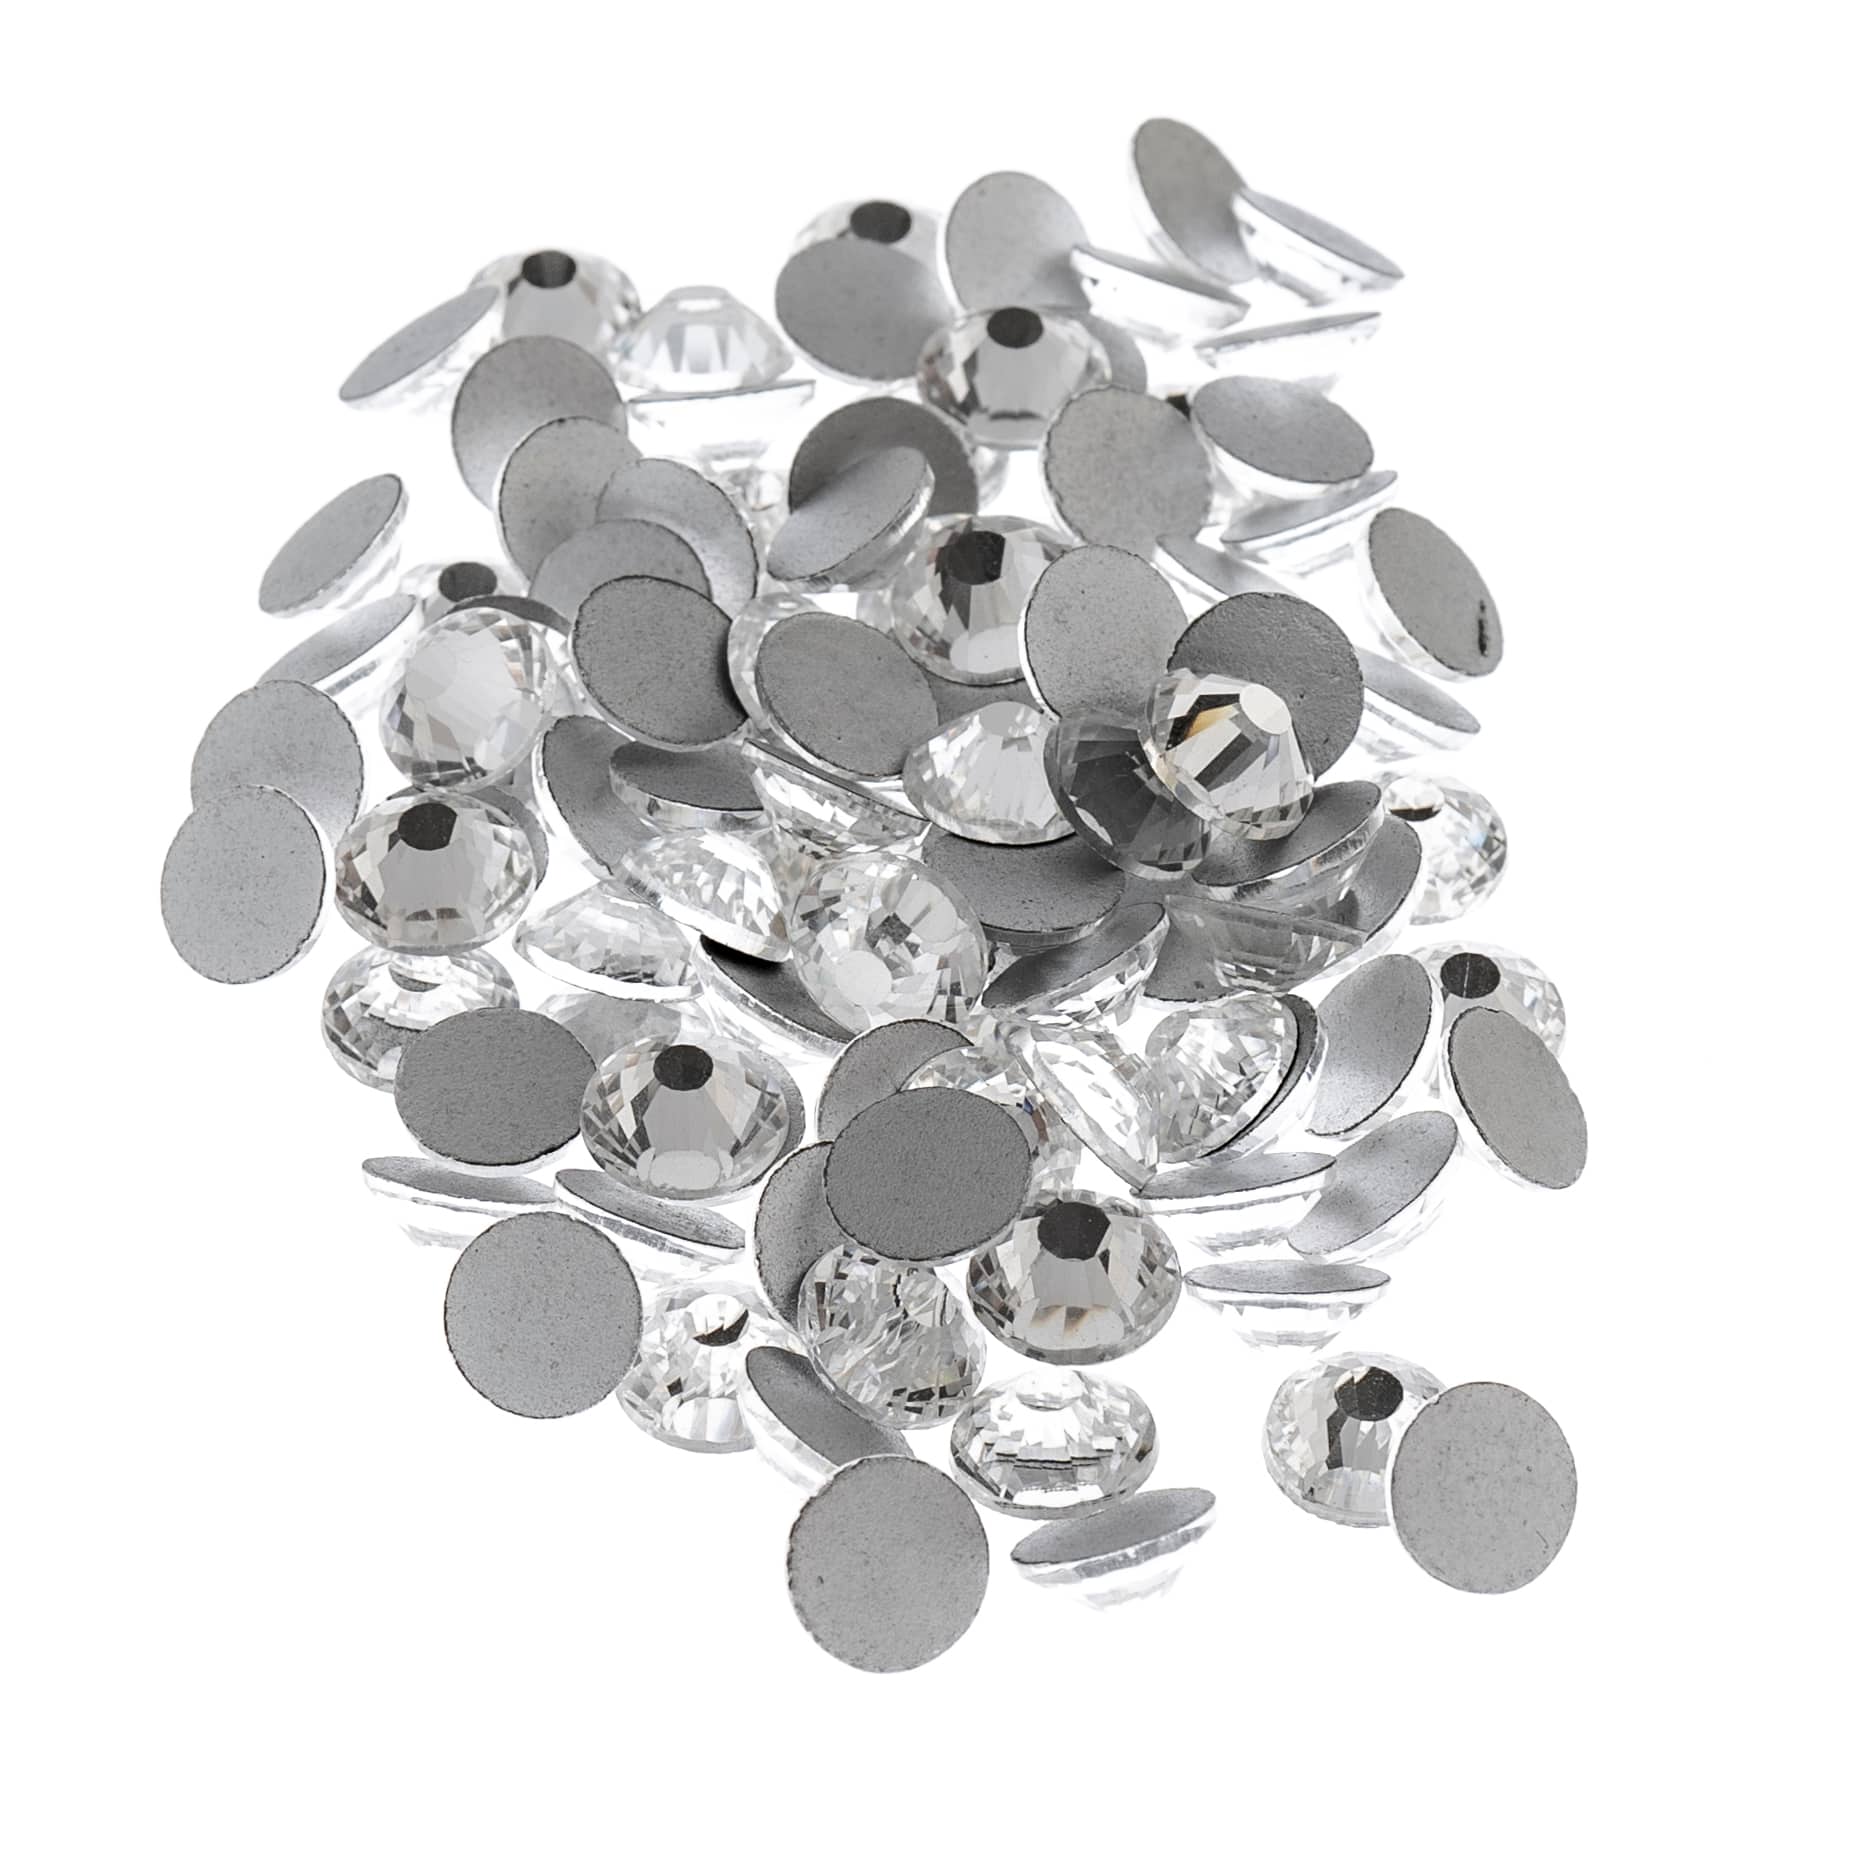 Crystal Radiance Hotfix Tool Set by Bead Landing in Gray | Michaels